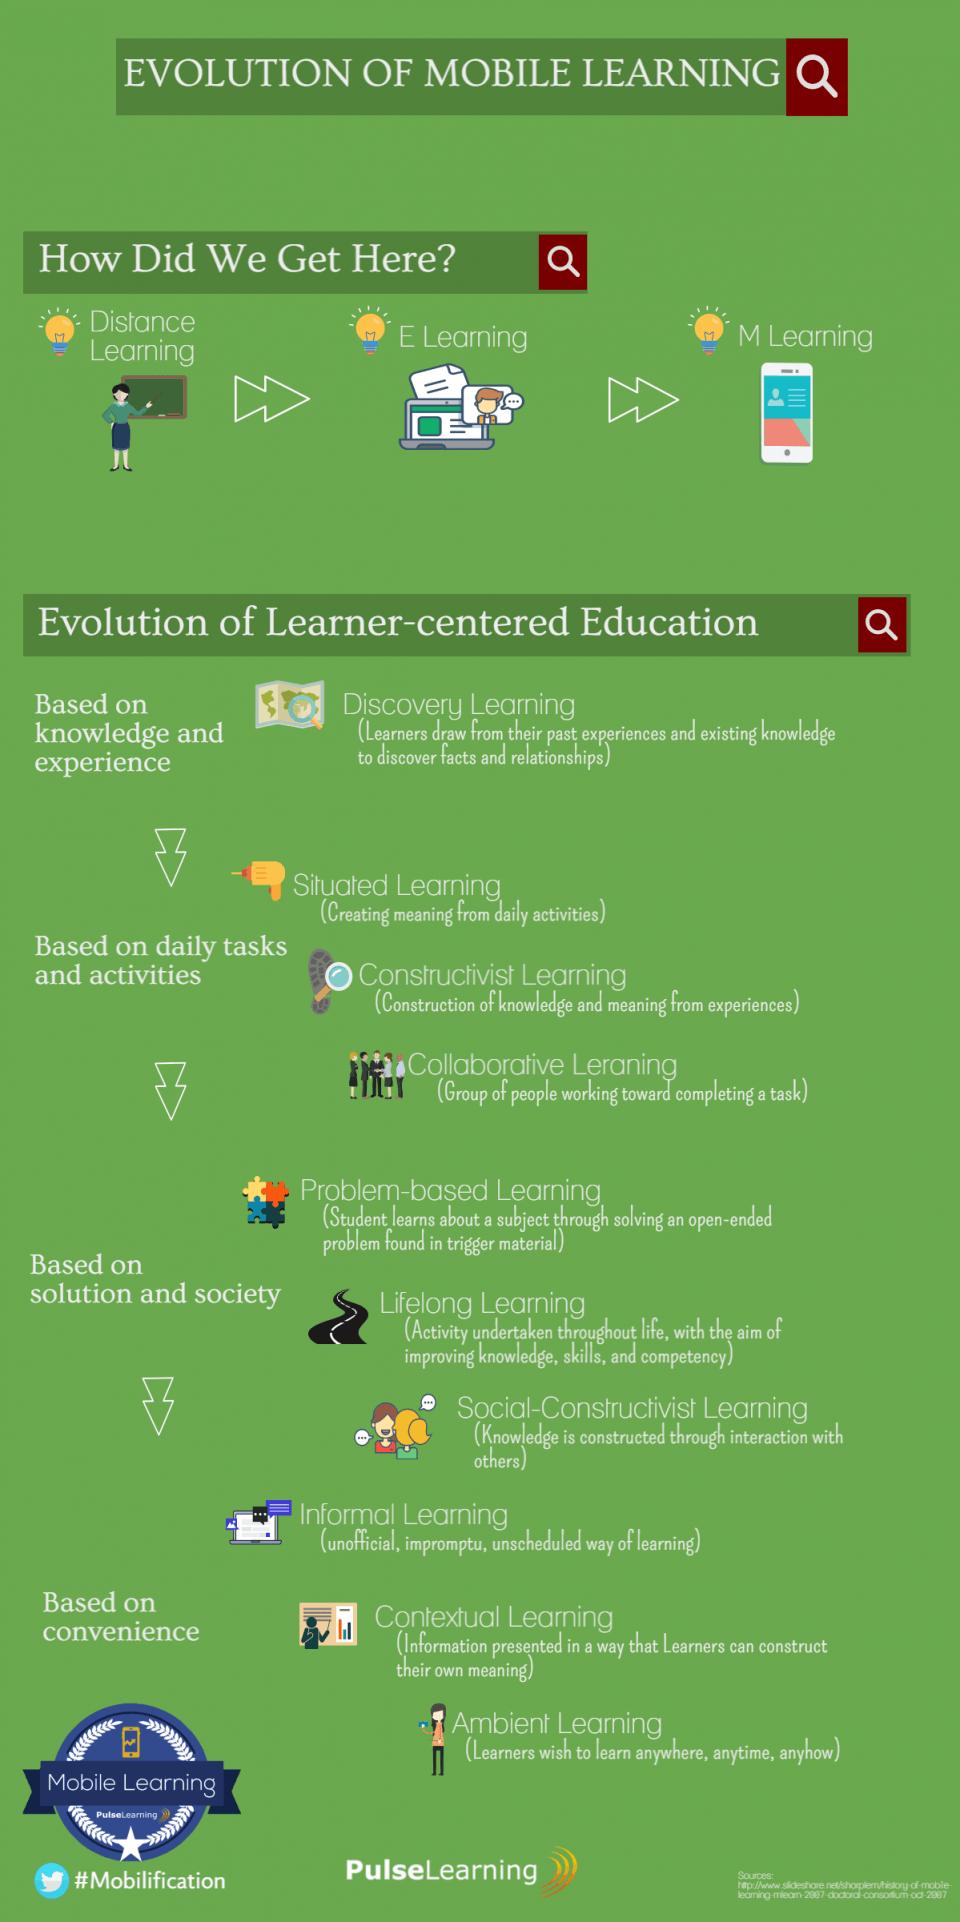 Evolution of Mobile Learning Infographic